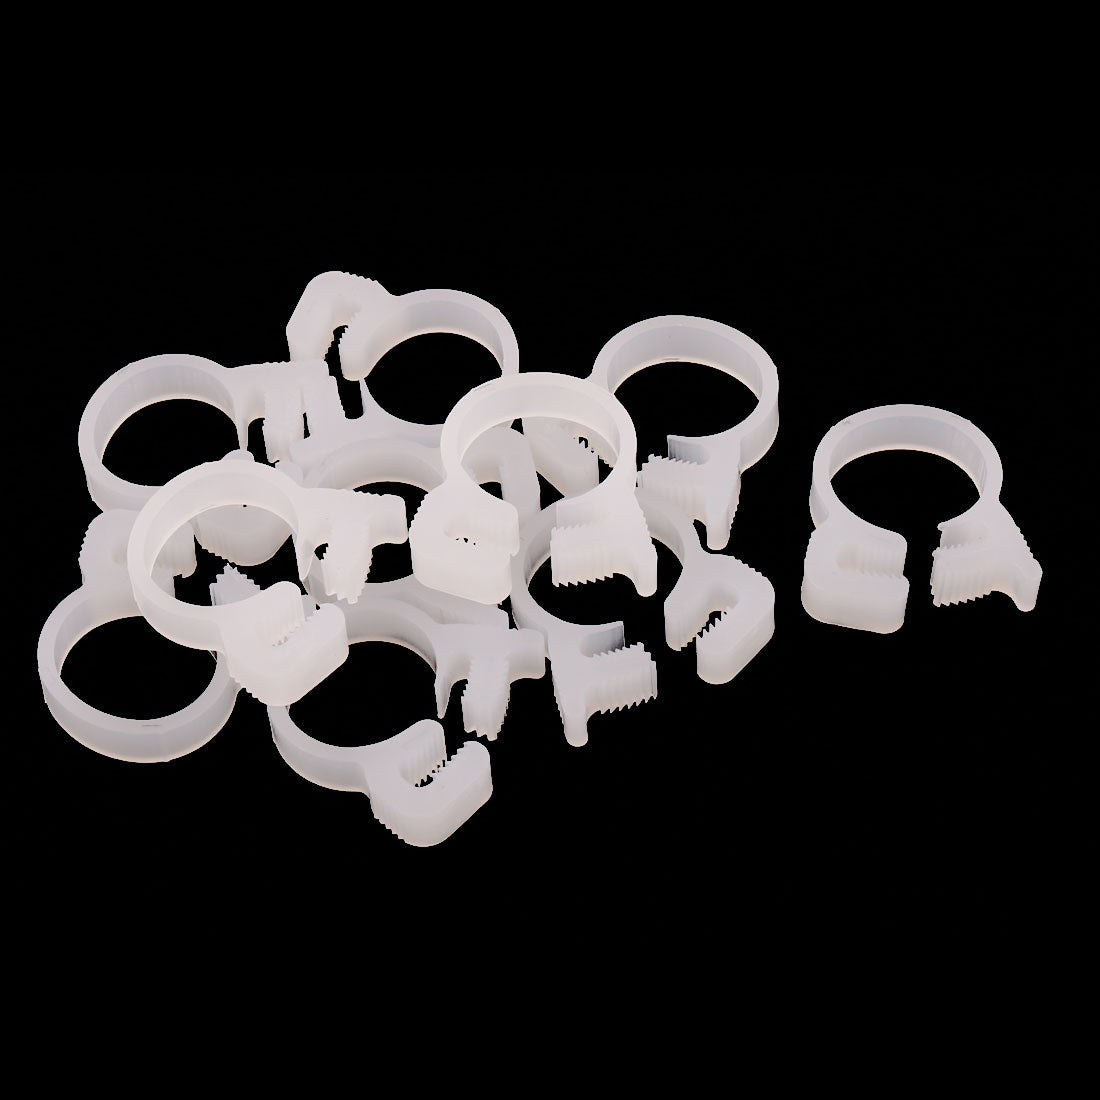 uxcell Uxcell 10 Pcs 12.3-14mm Range Plastic Adjustable Band Hose Pipe Fastener Clamp